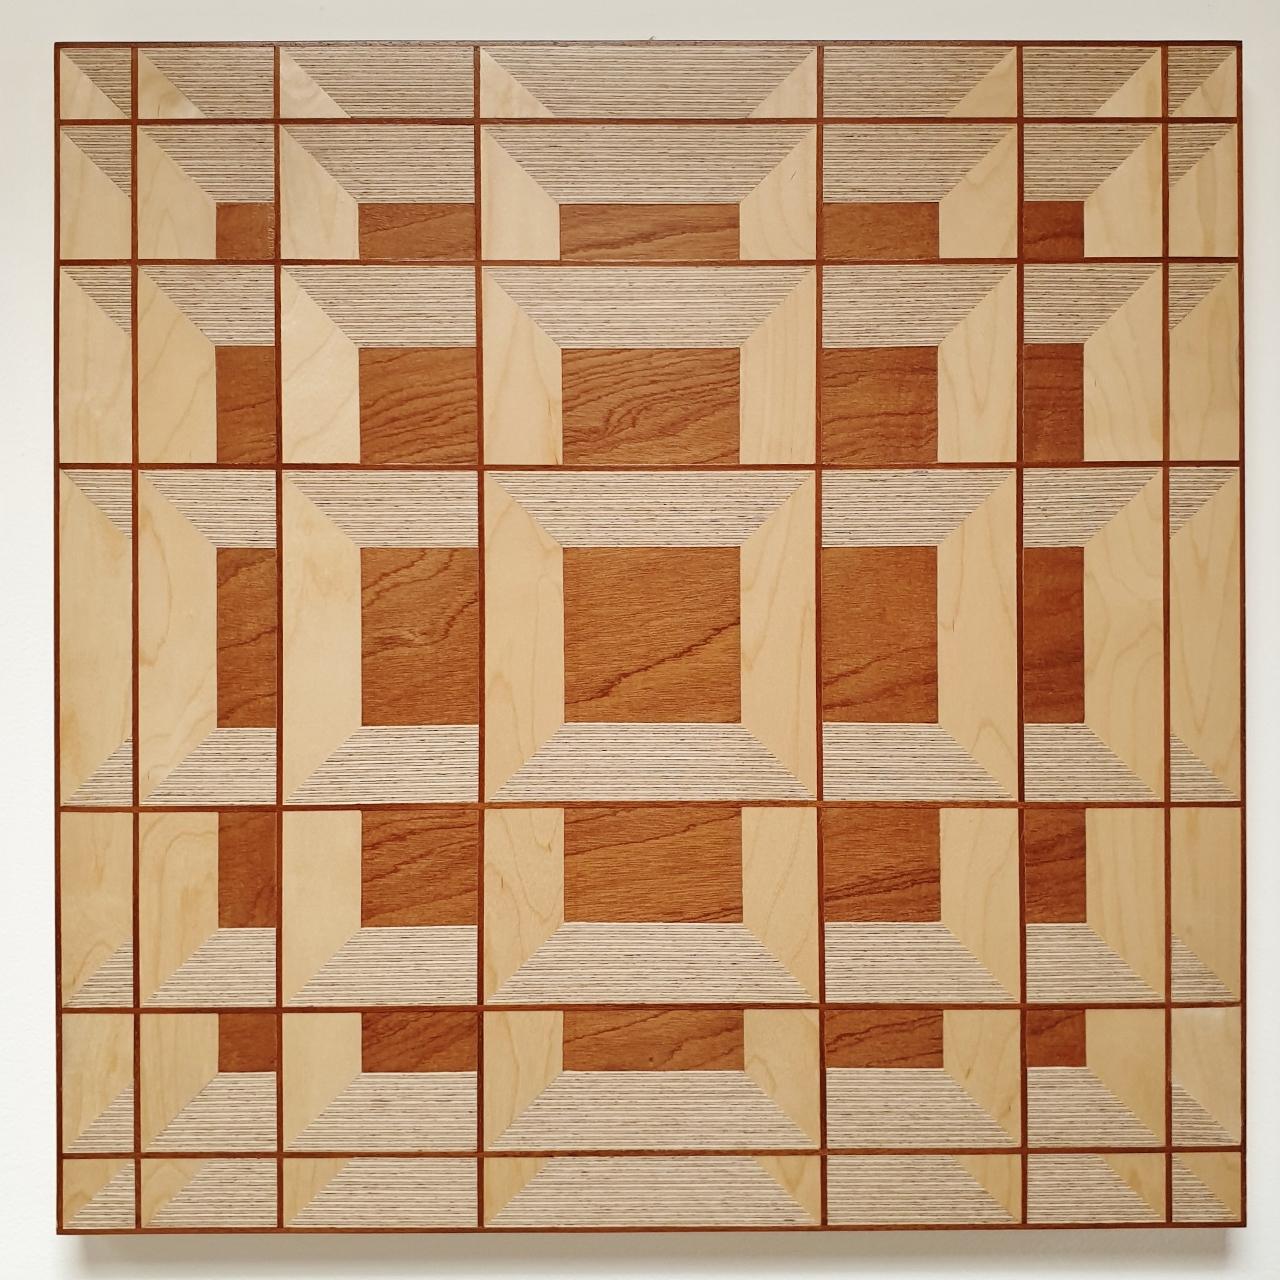 Hanneke Rijks Abstract Painting - Grid 20-01 - contemporary modern abstract geometric wood veneer painting object